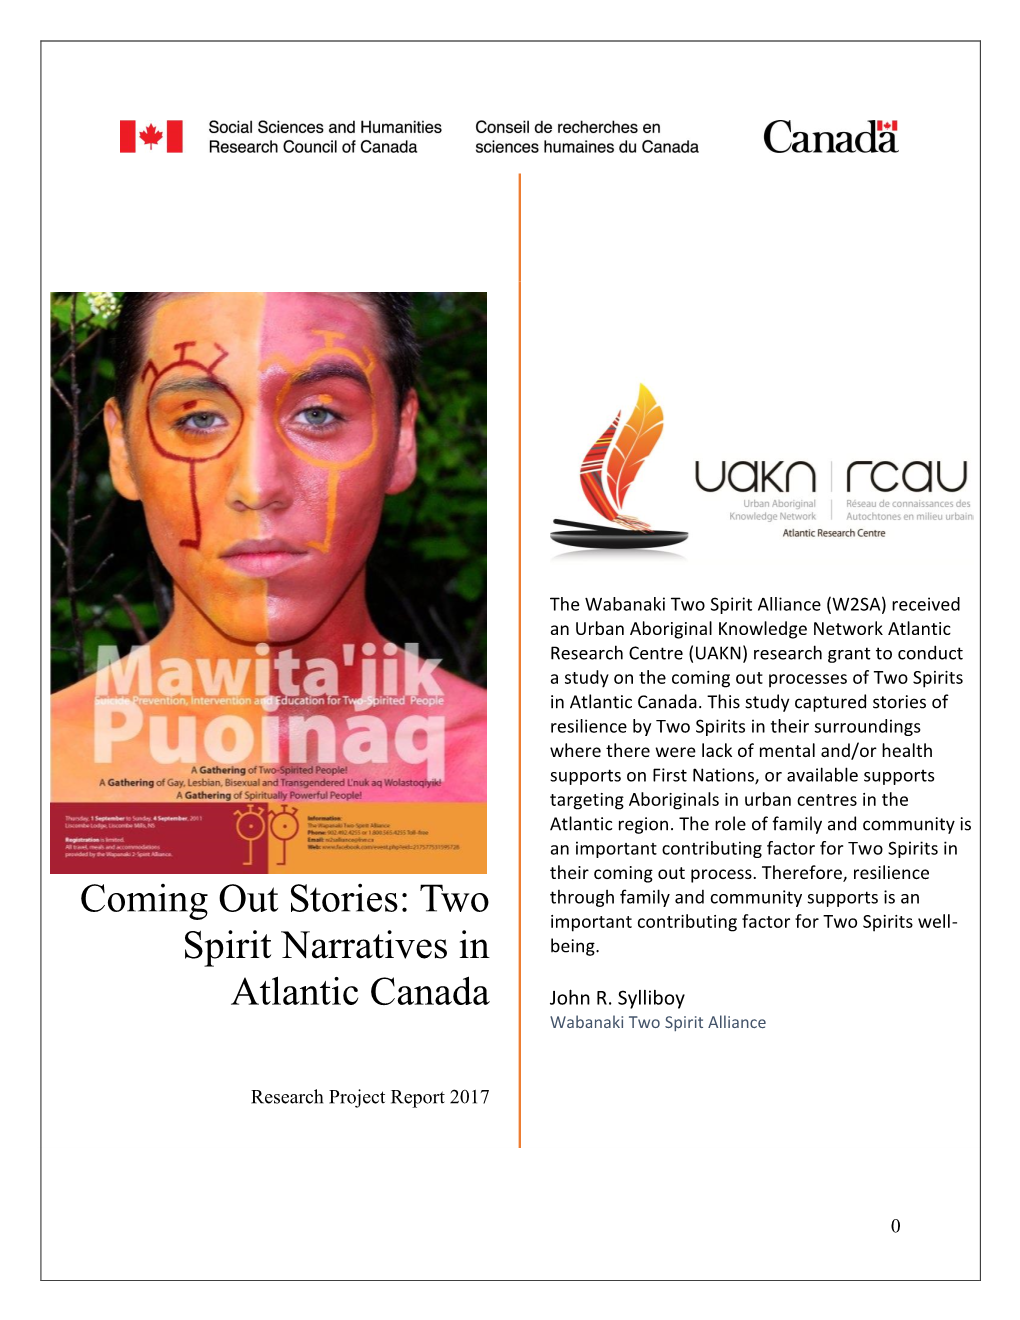 Coming out Stories: Two Spirit Narratives in Atlantic Canada